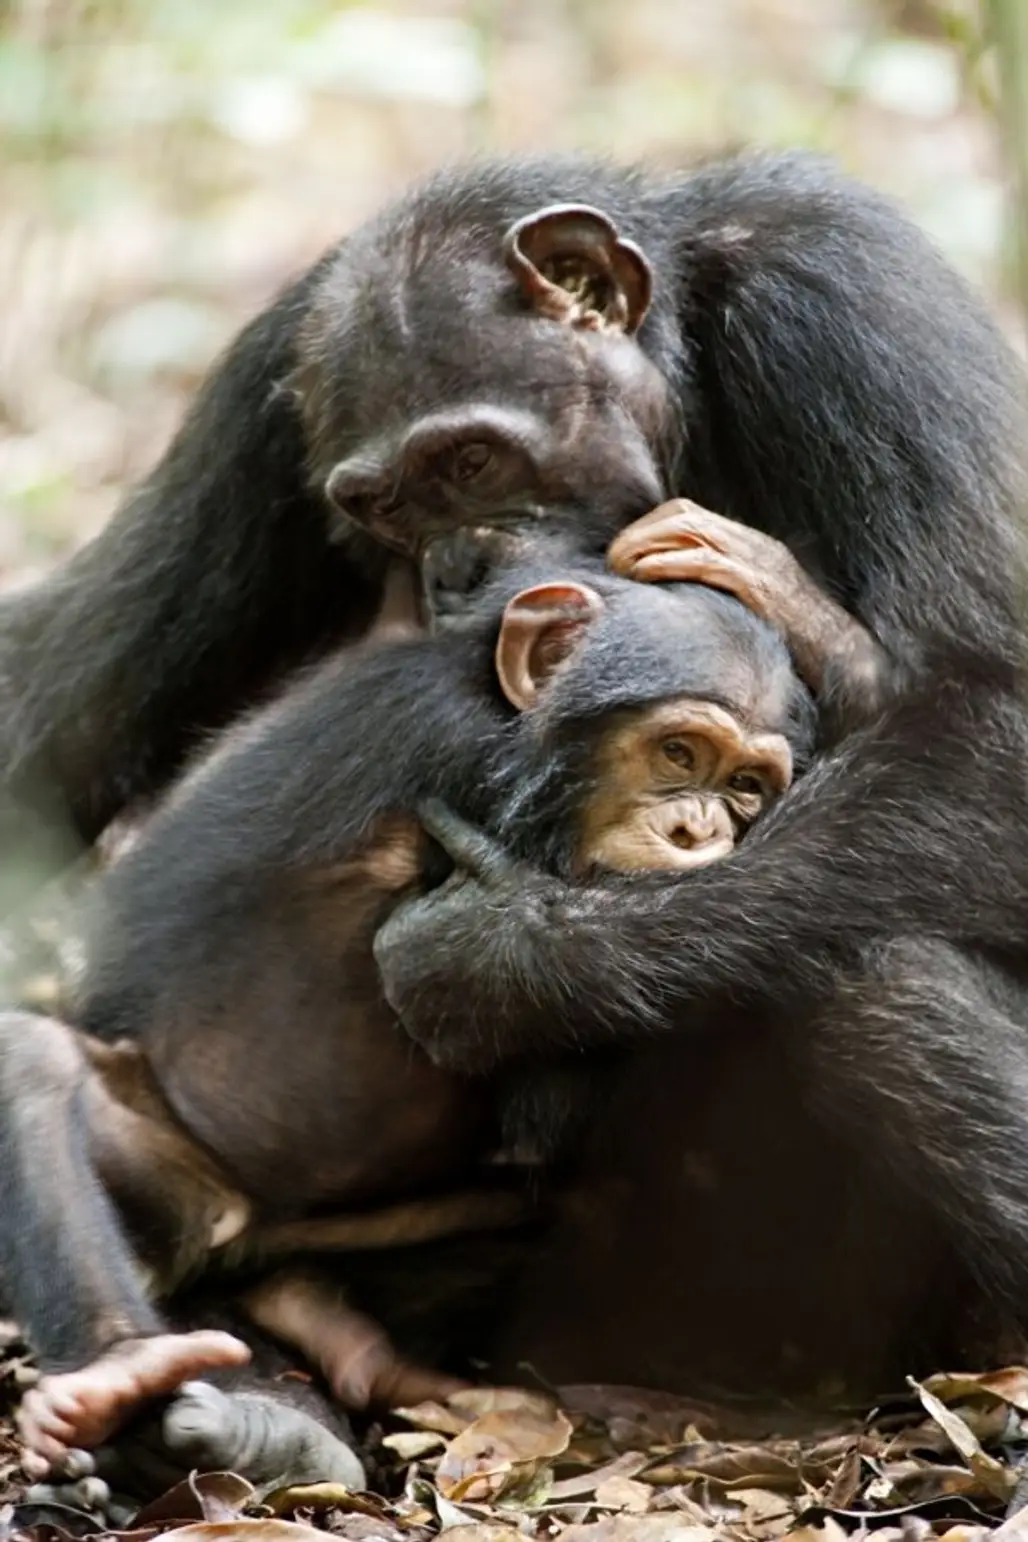 Safe in Mom's Arms